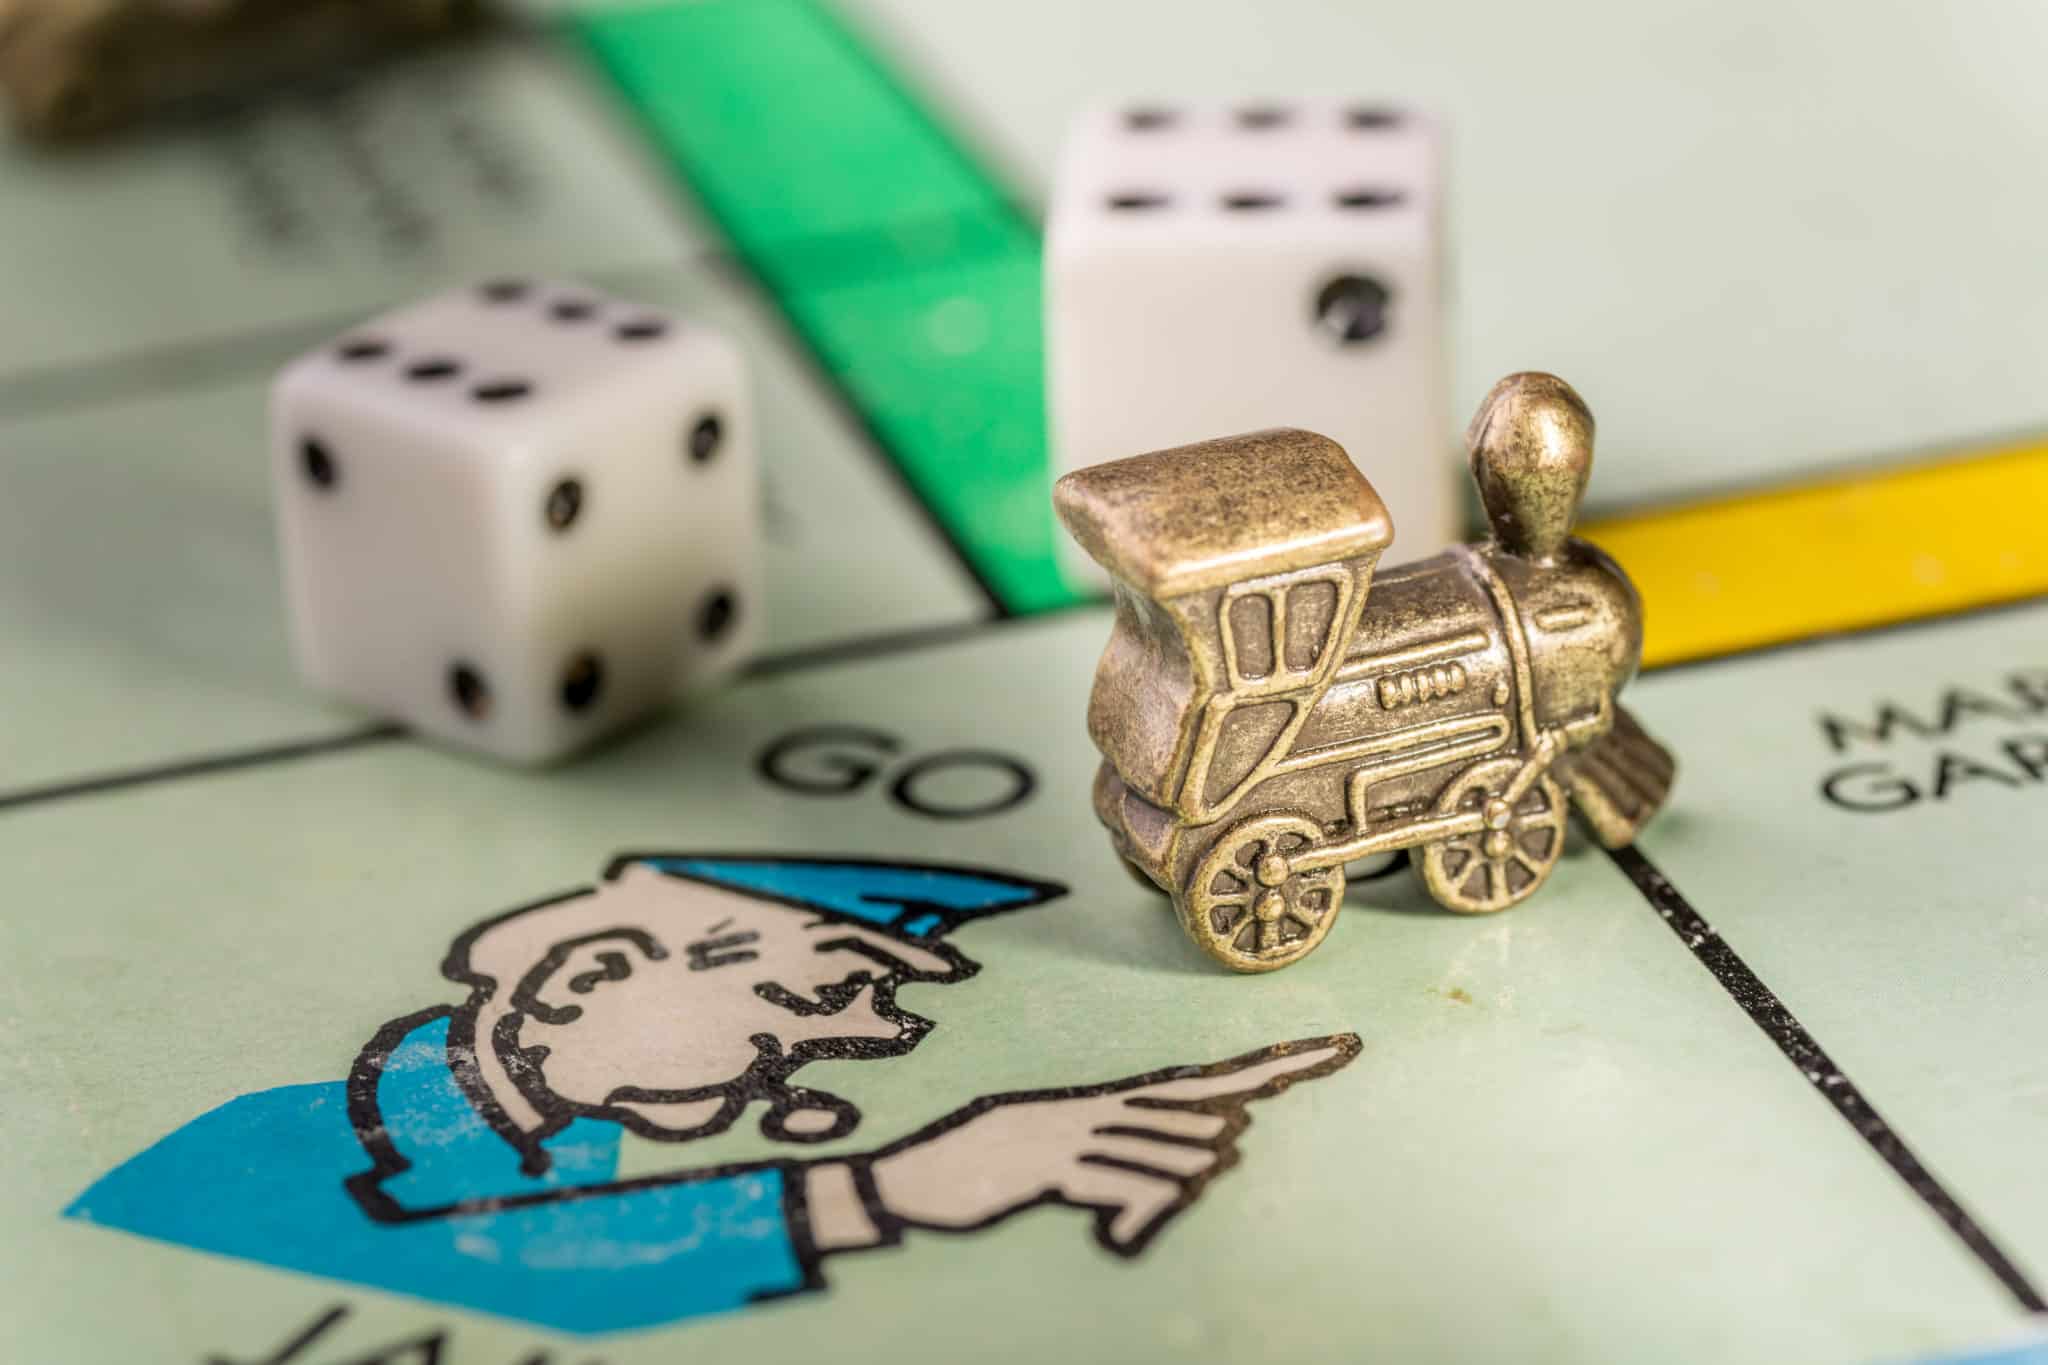 6 Real-Life Money Lessons You Can Learn From Monopoly